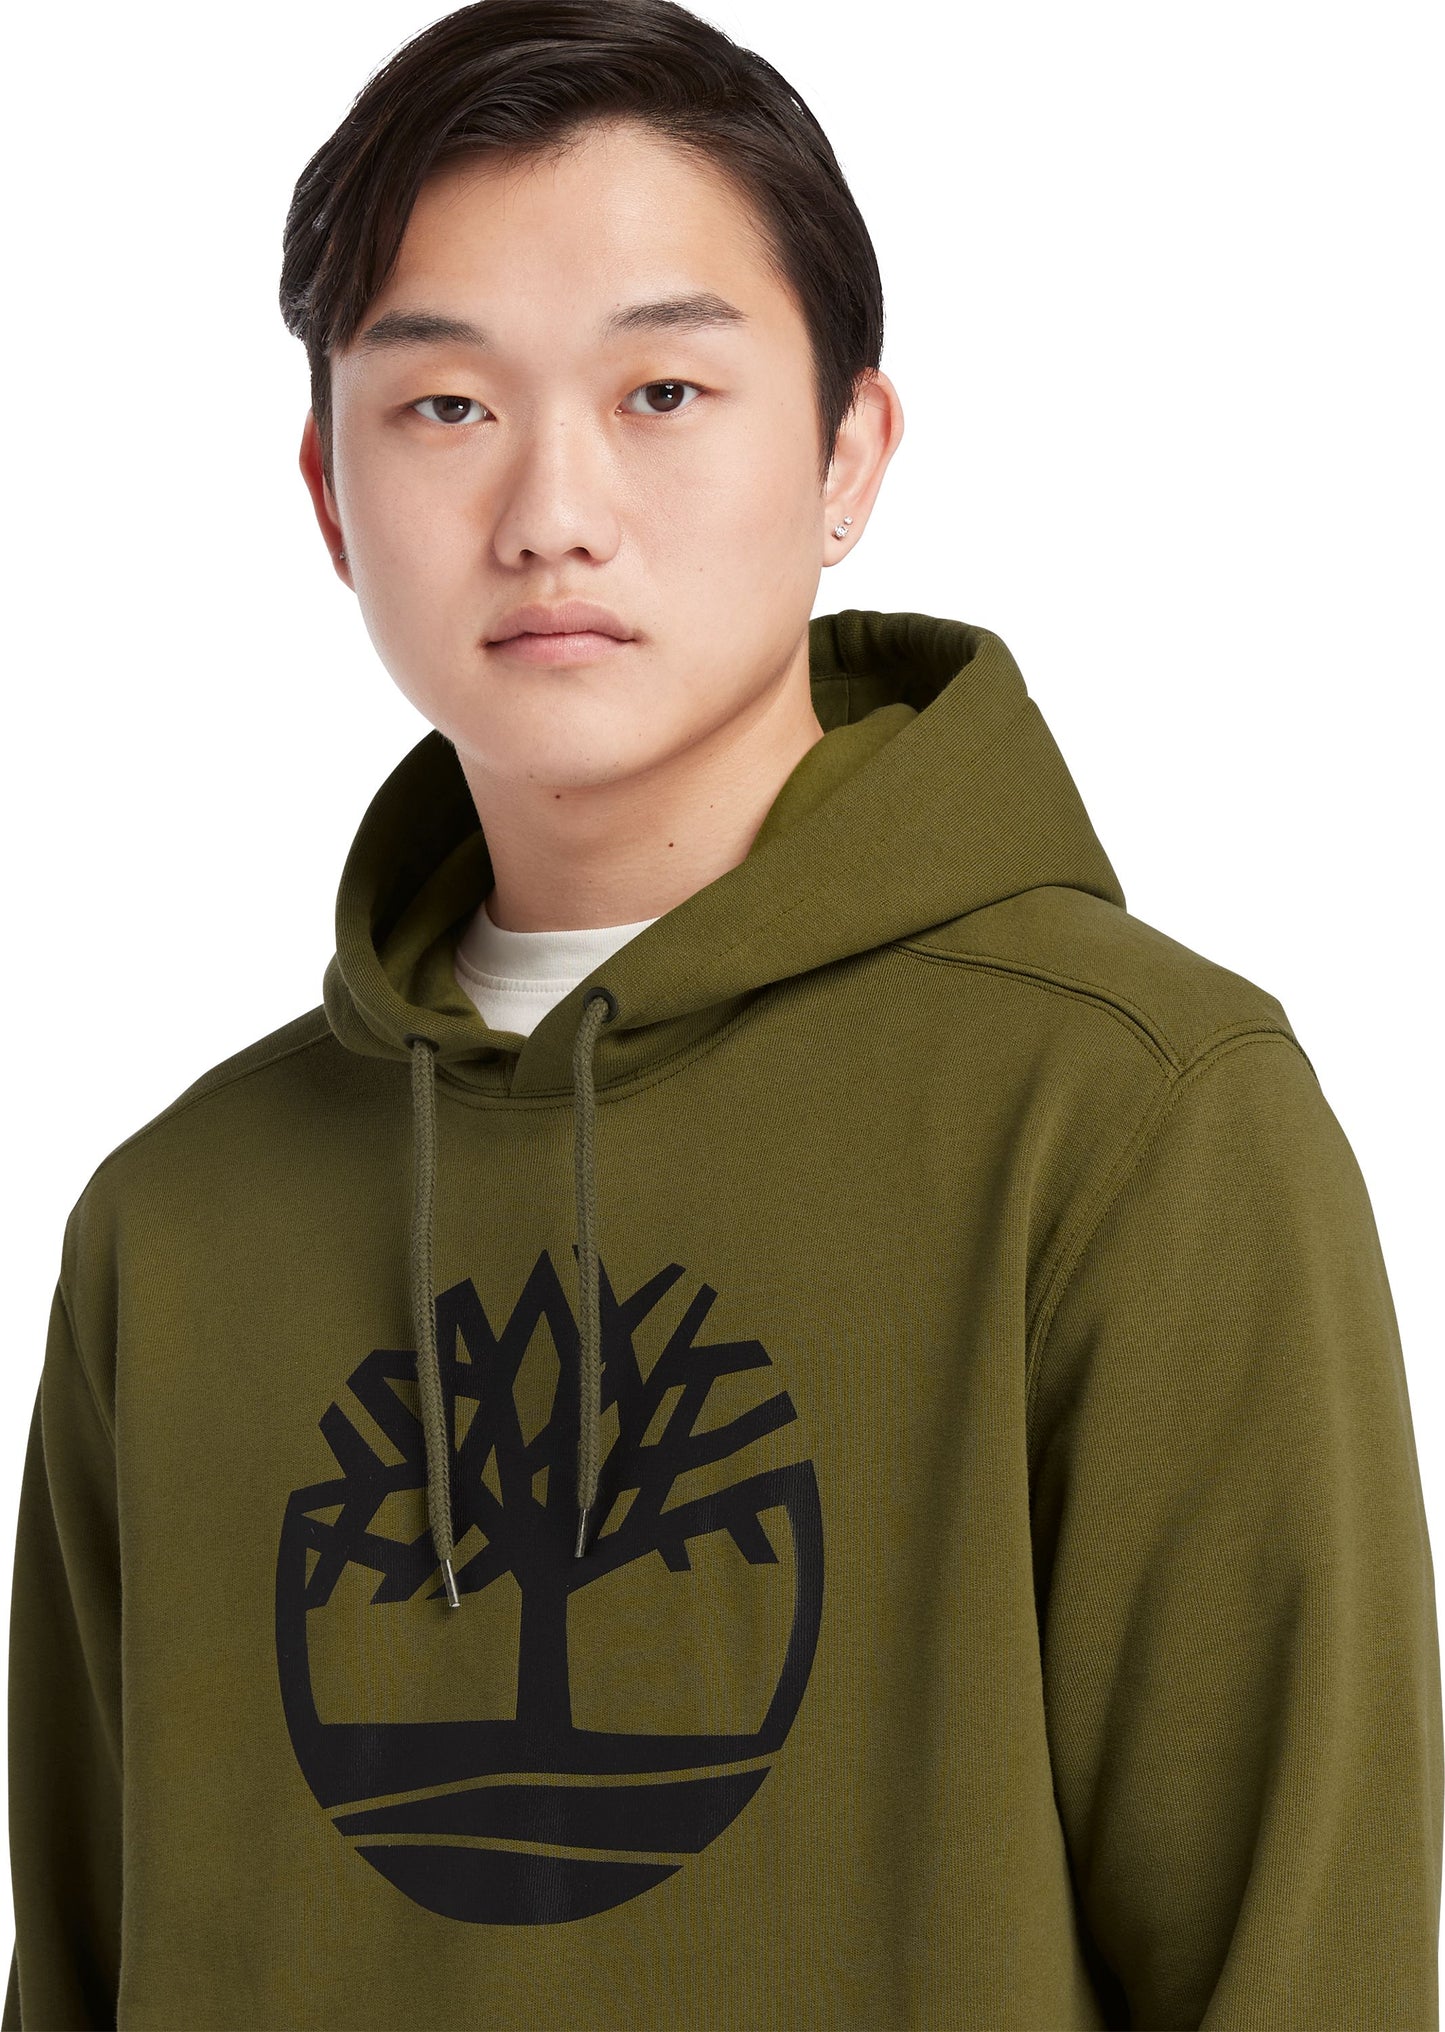 Timberland Apparel Core Tree Logo Pullover Hoodie Olive